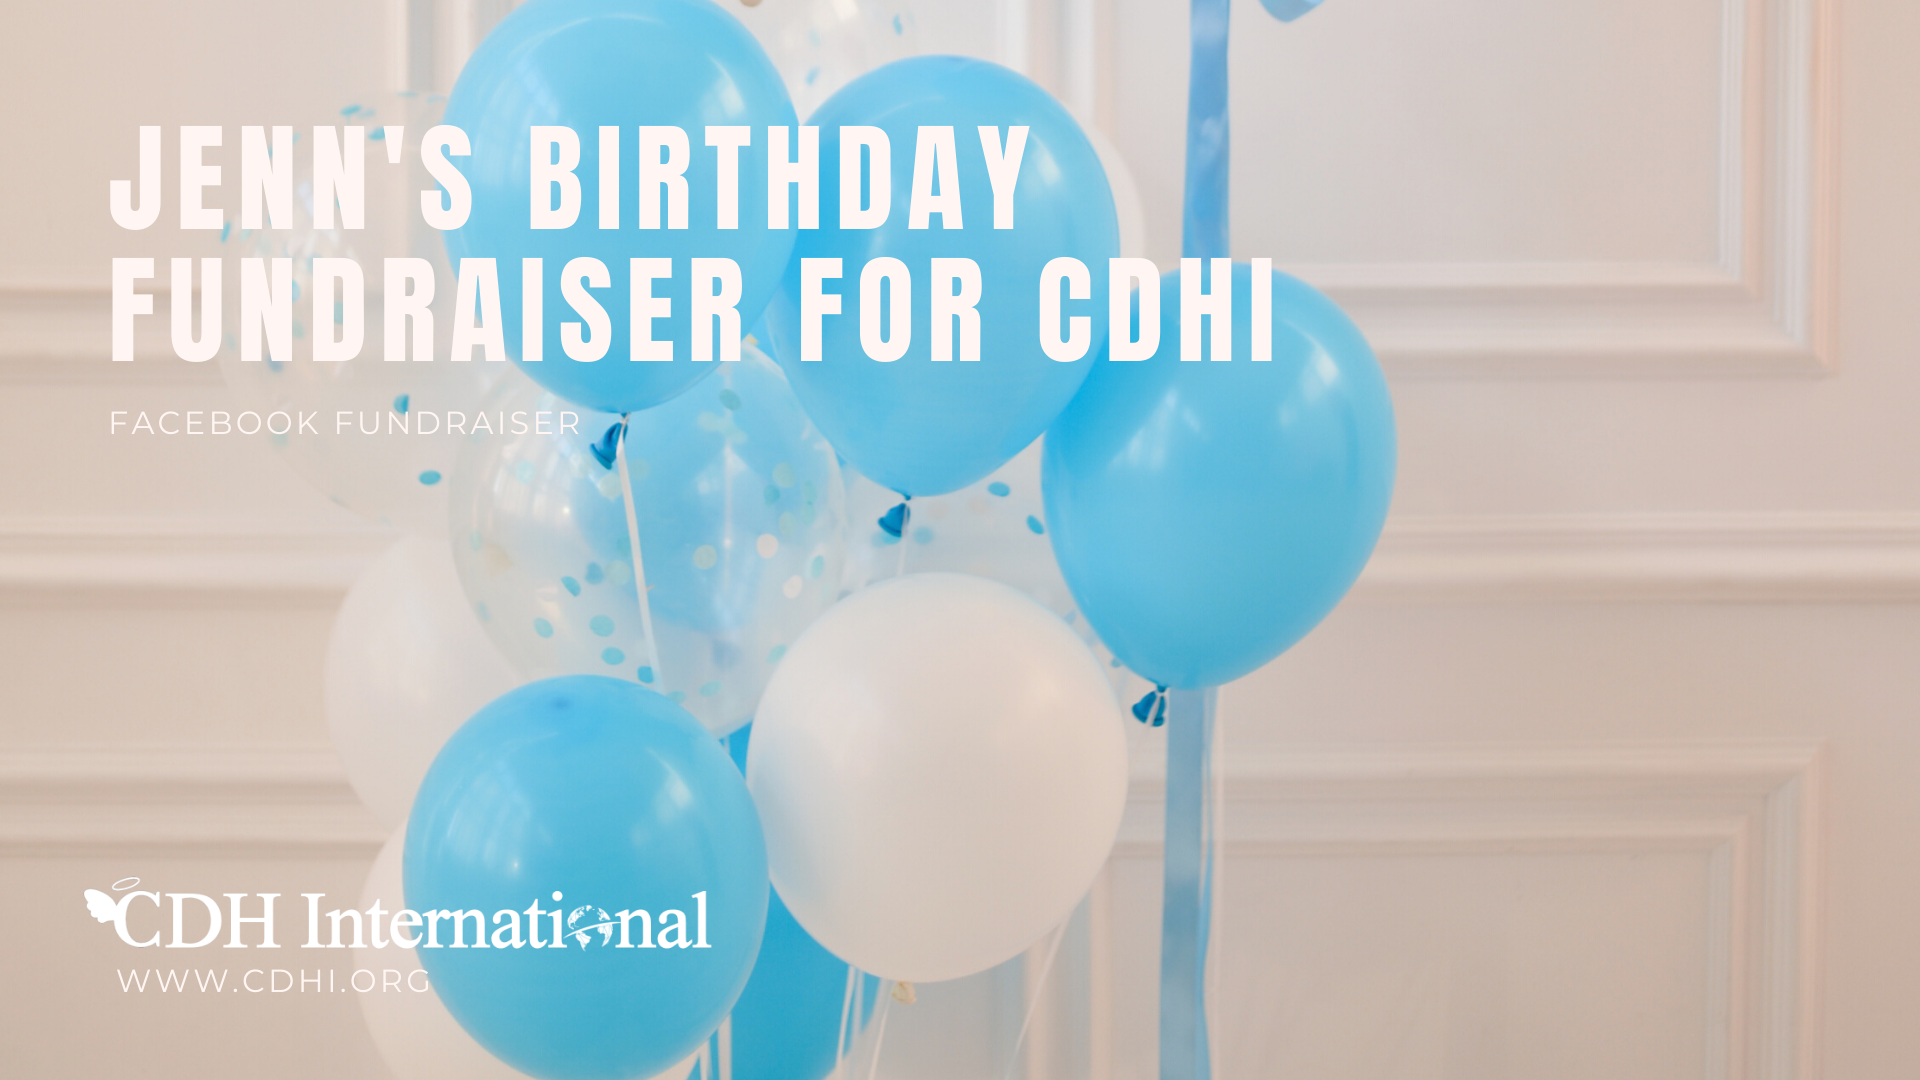 Eric’s Birthday Fundraiser for CDHI in Honor of His Granddaughter